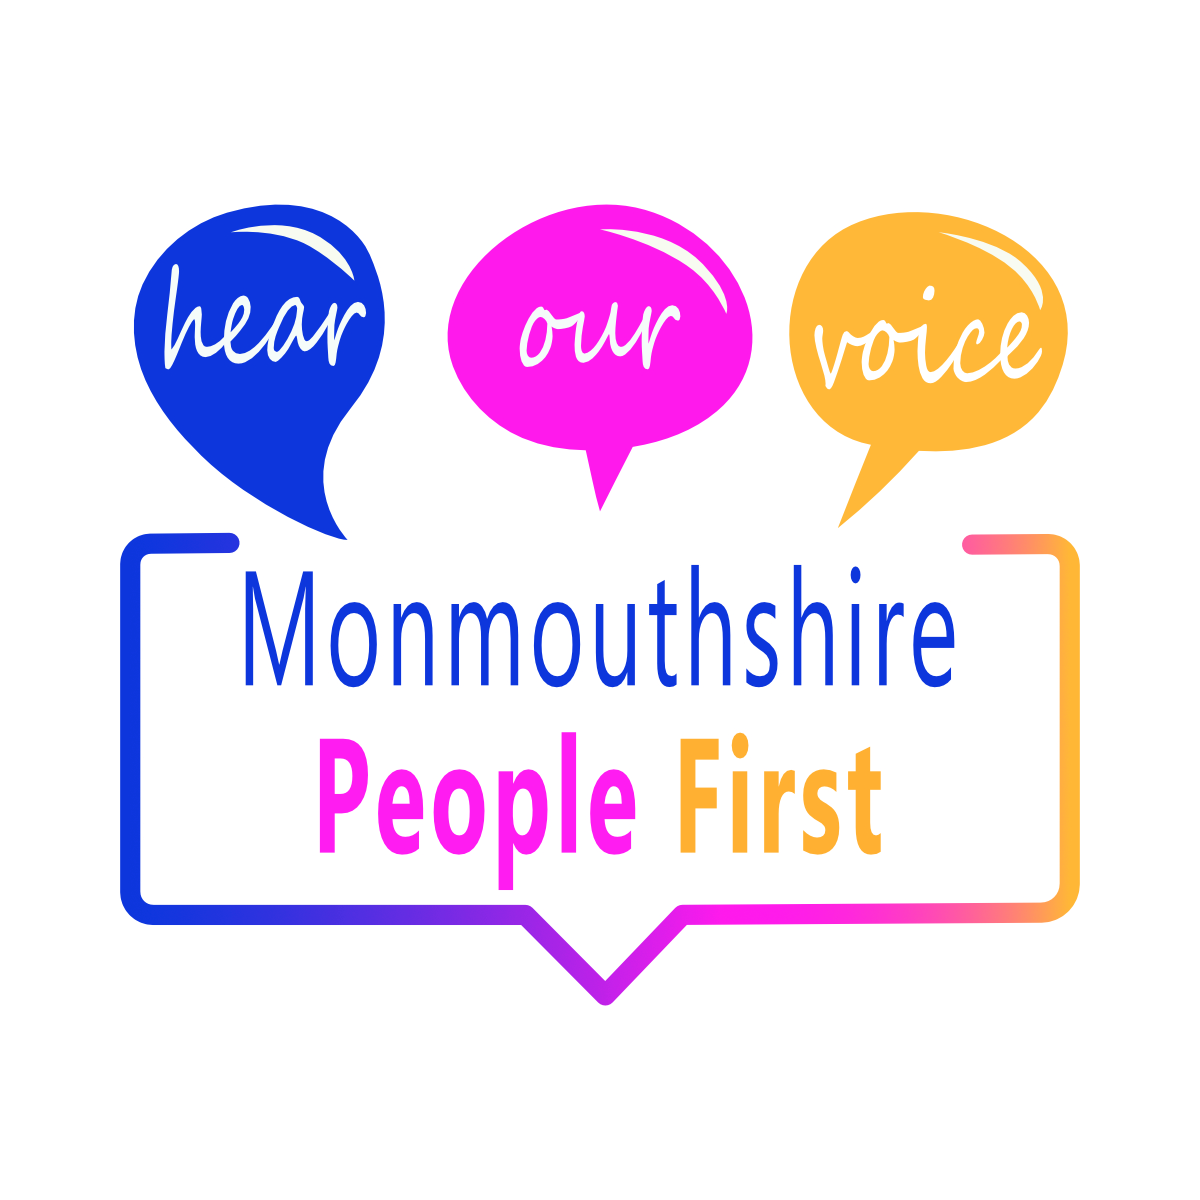 Monmouthshire People First